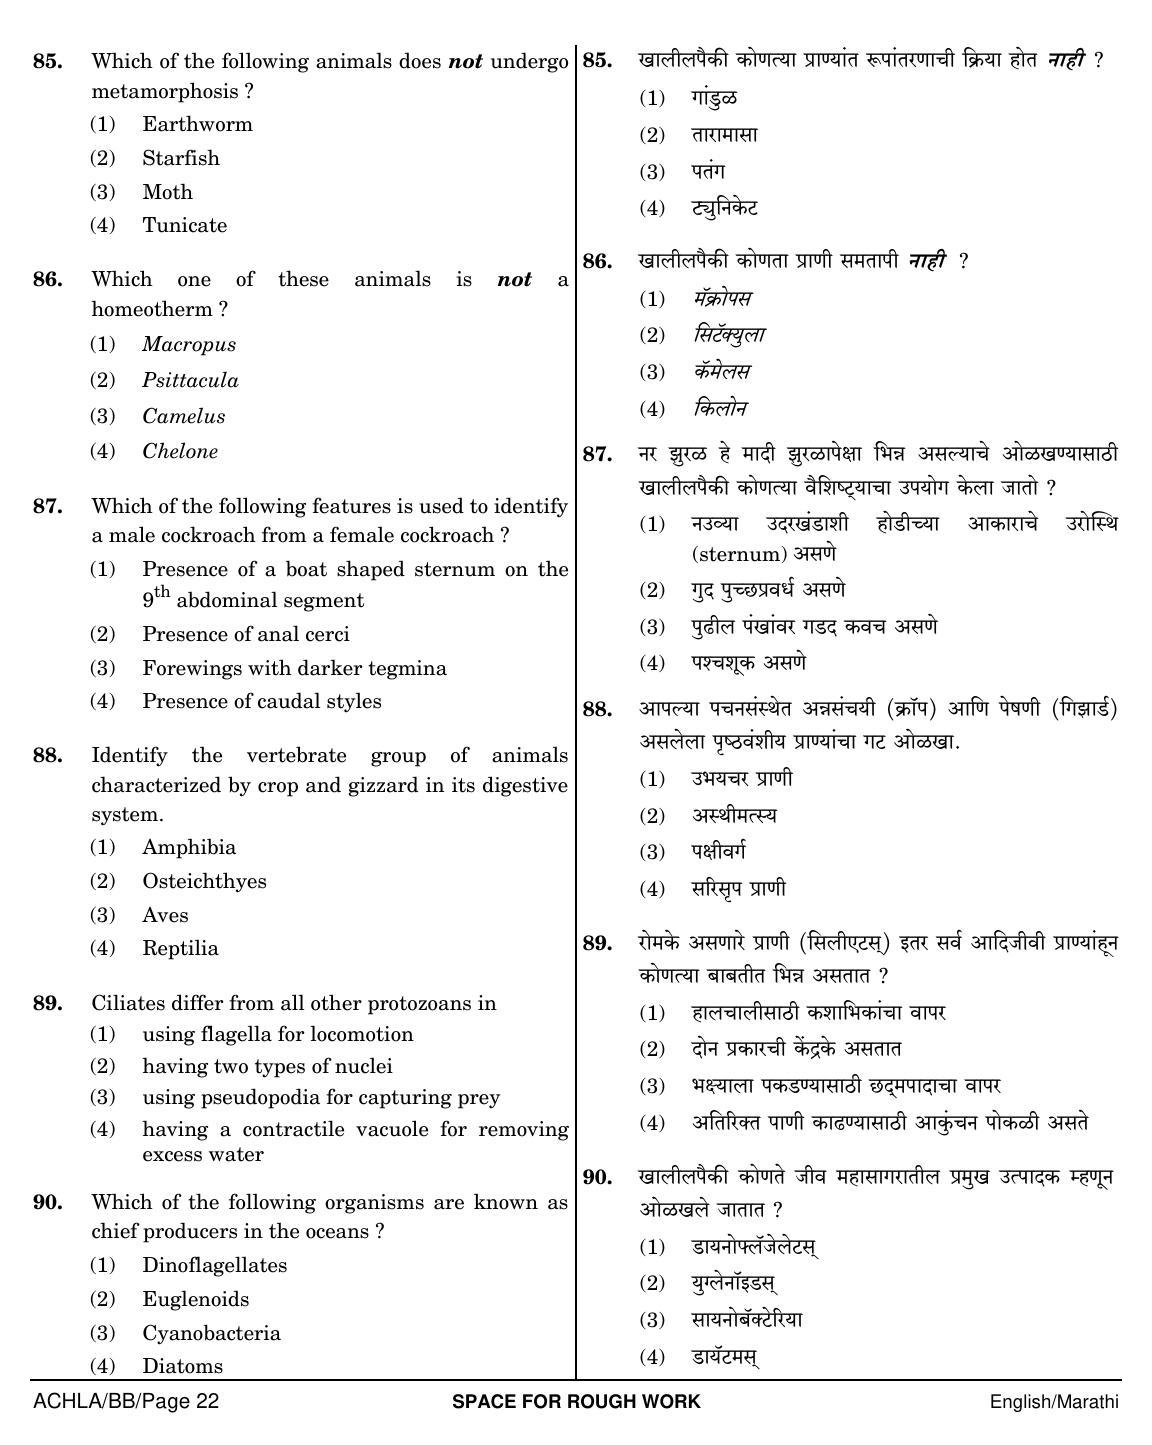 NEET Marathi BB 2018 Question Paper - Page 22